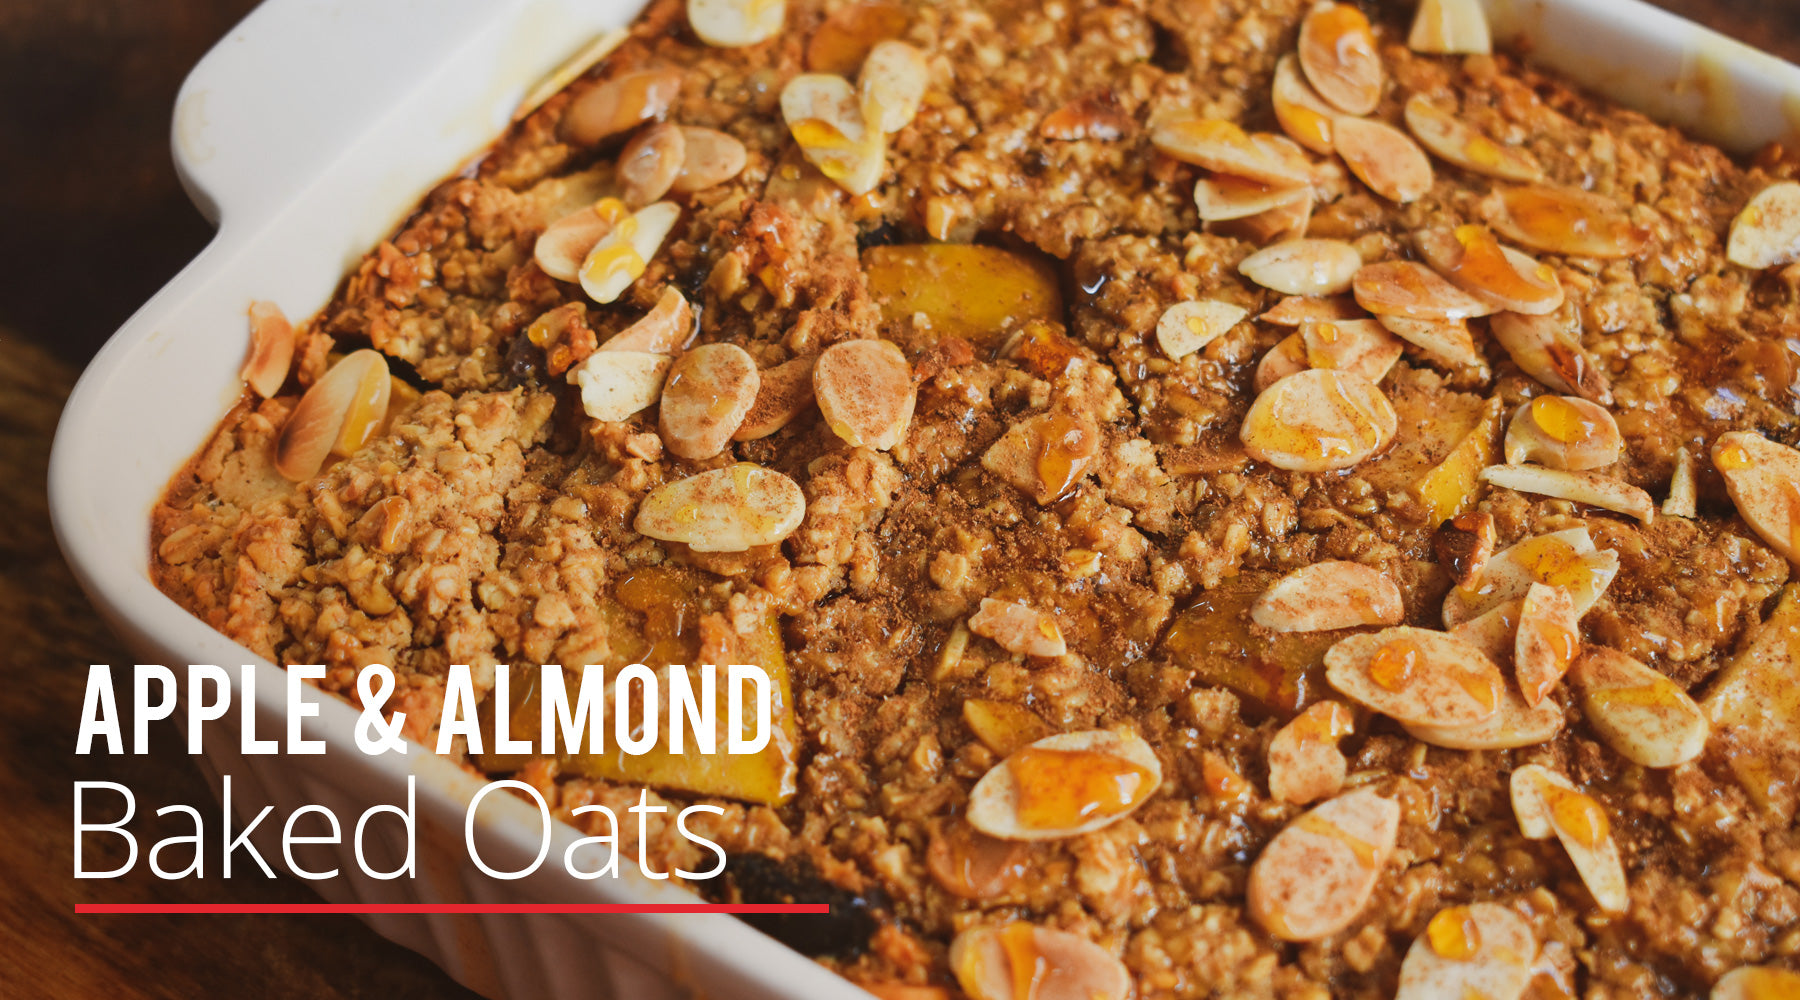 Deeliver Apple and Almond Baked Oats